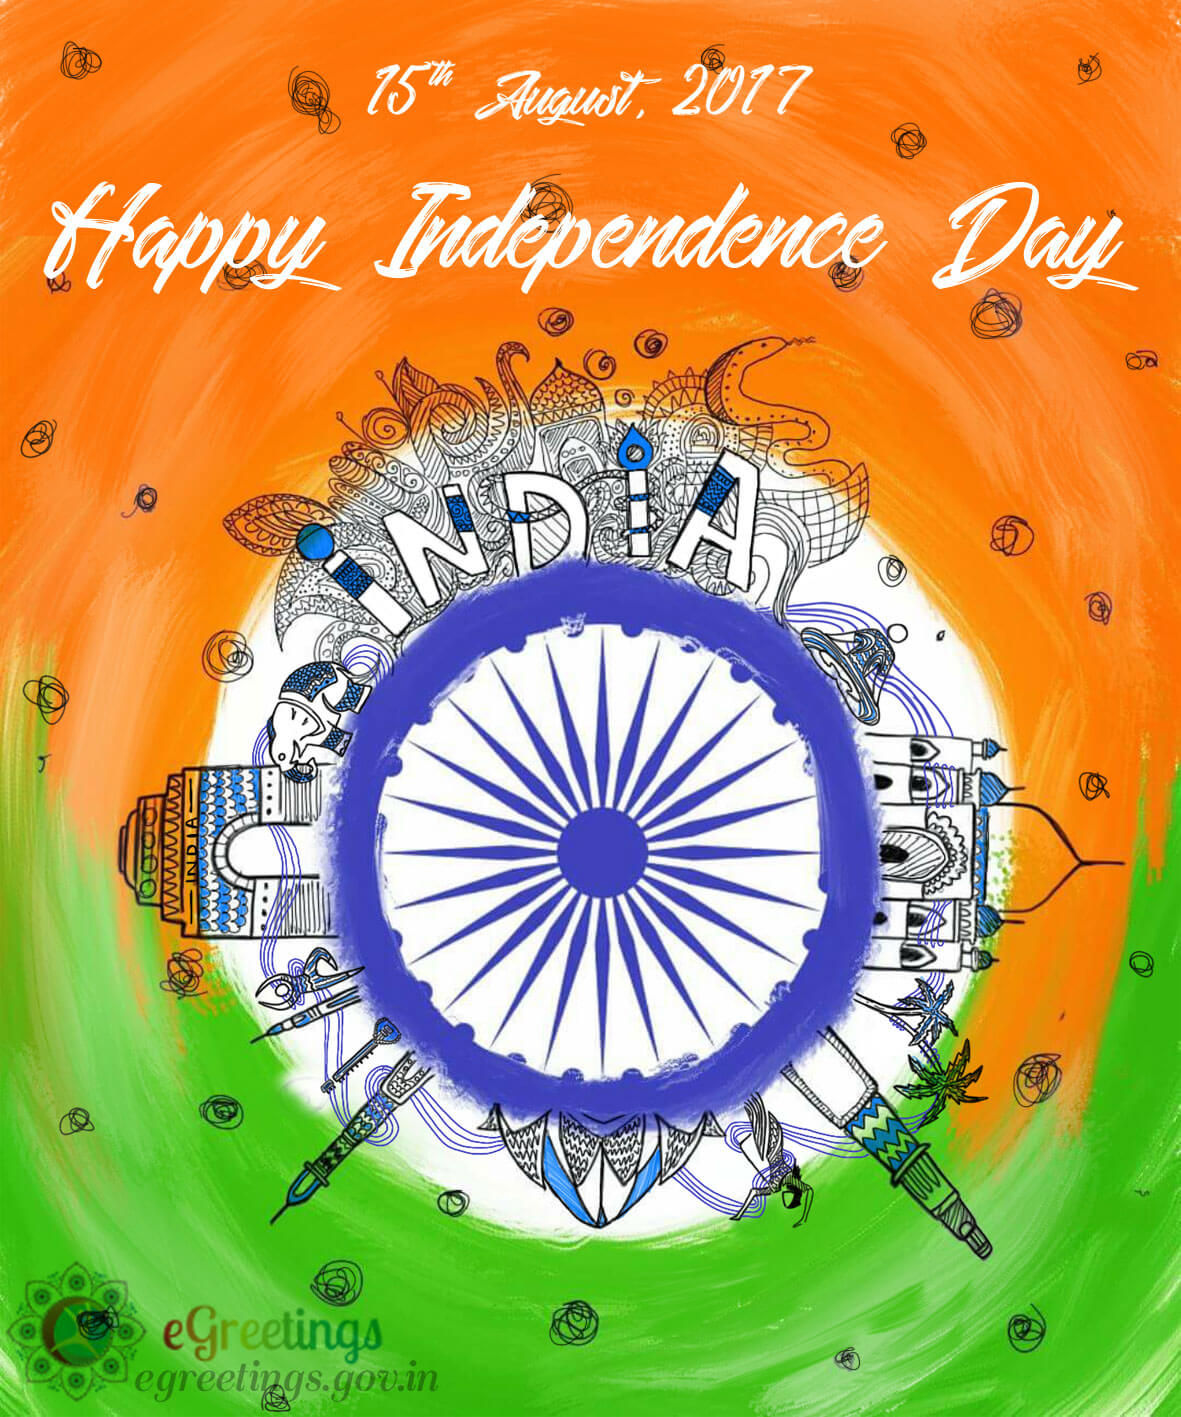 Share 187+ independence day card drawing